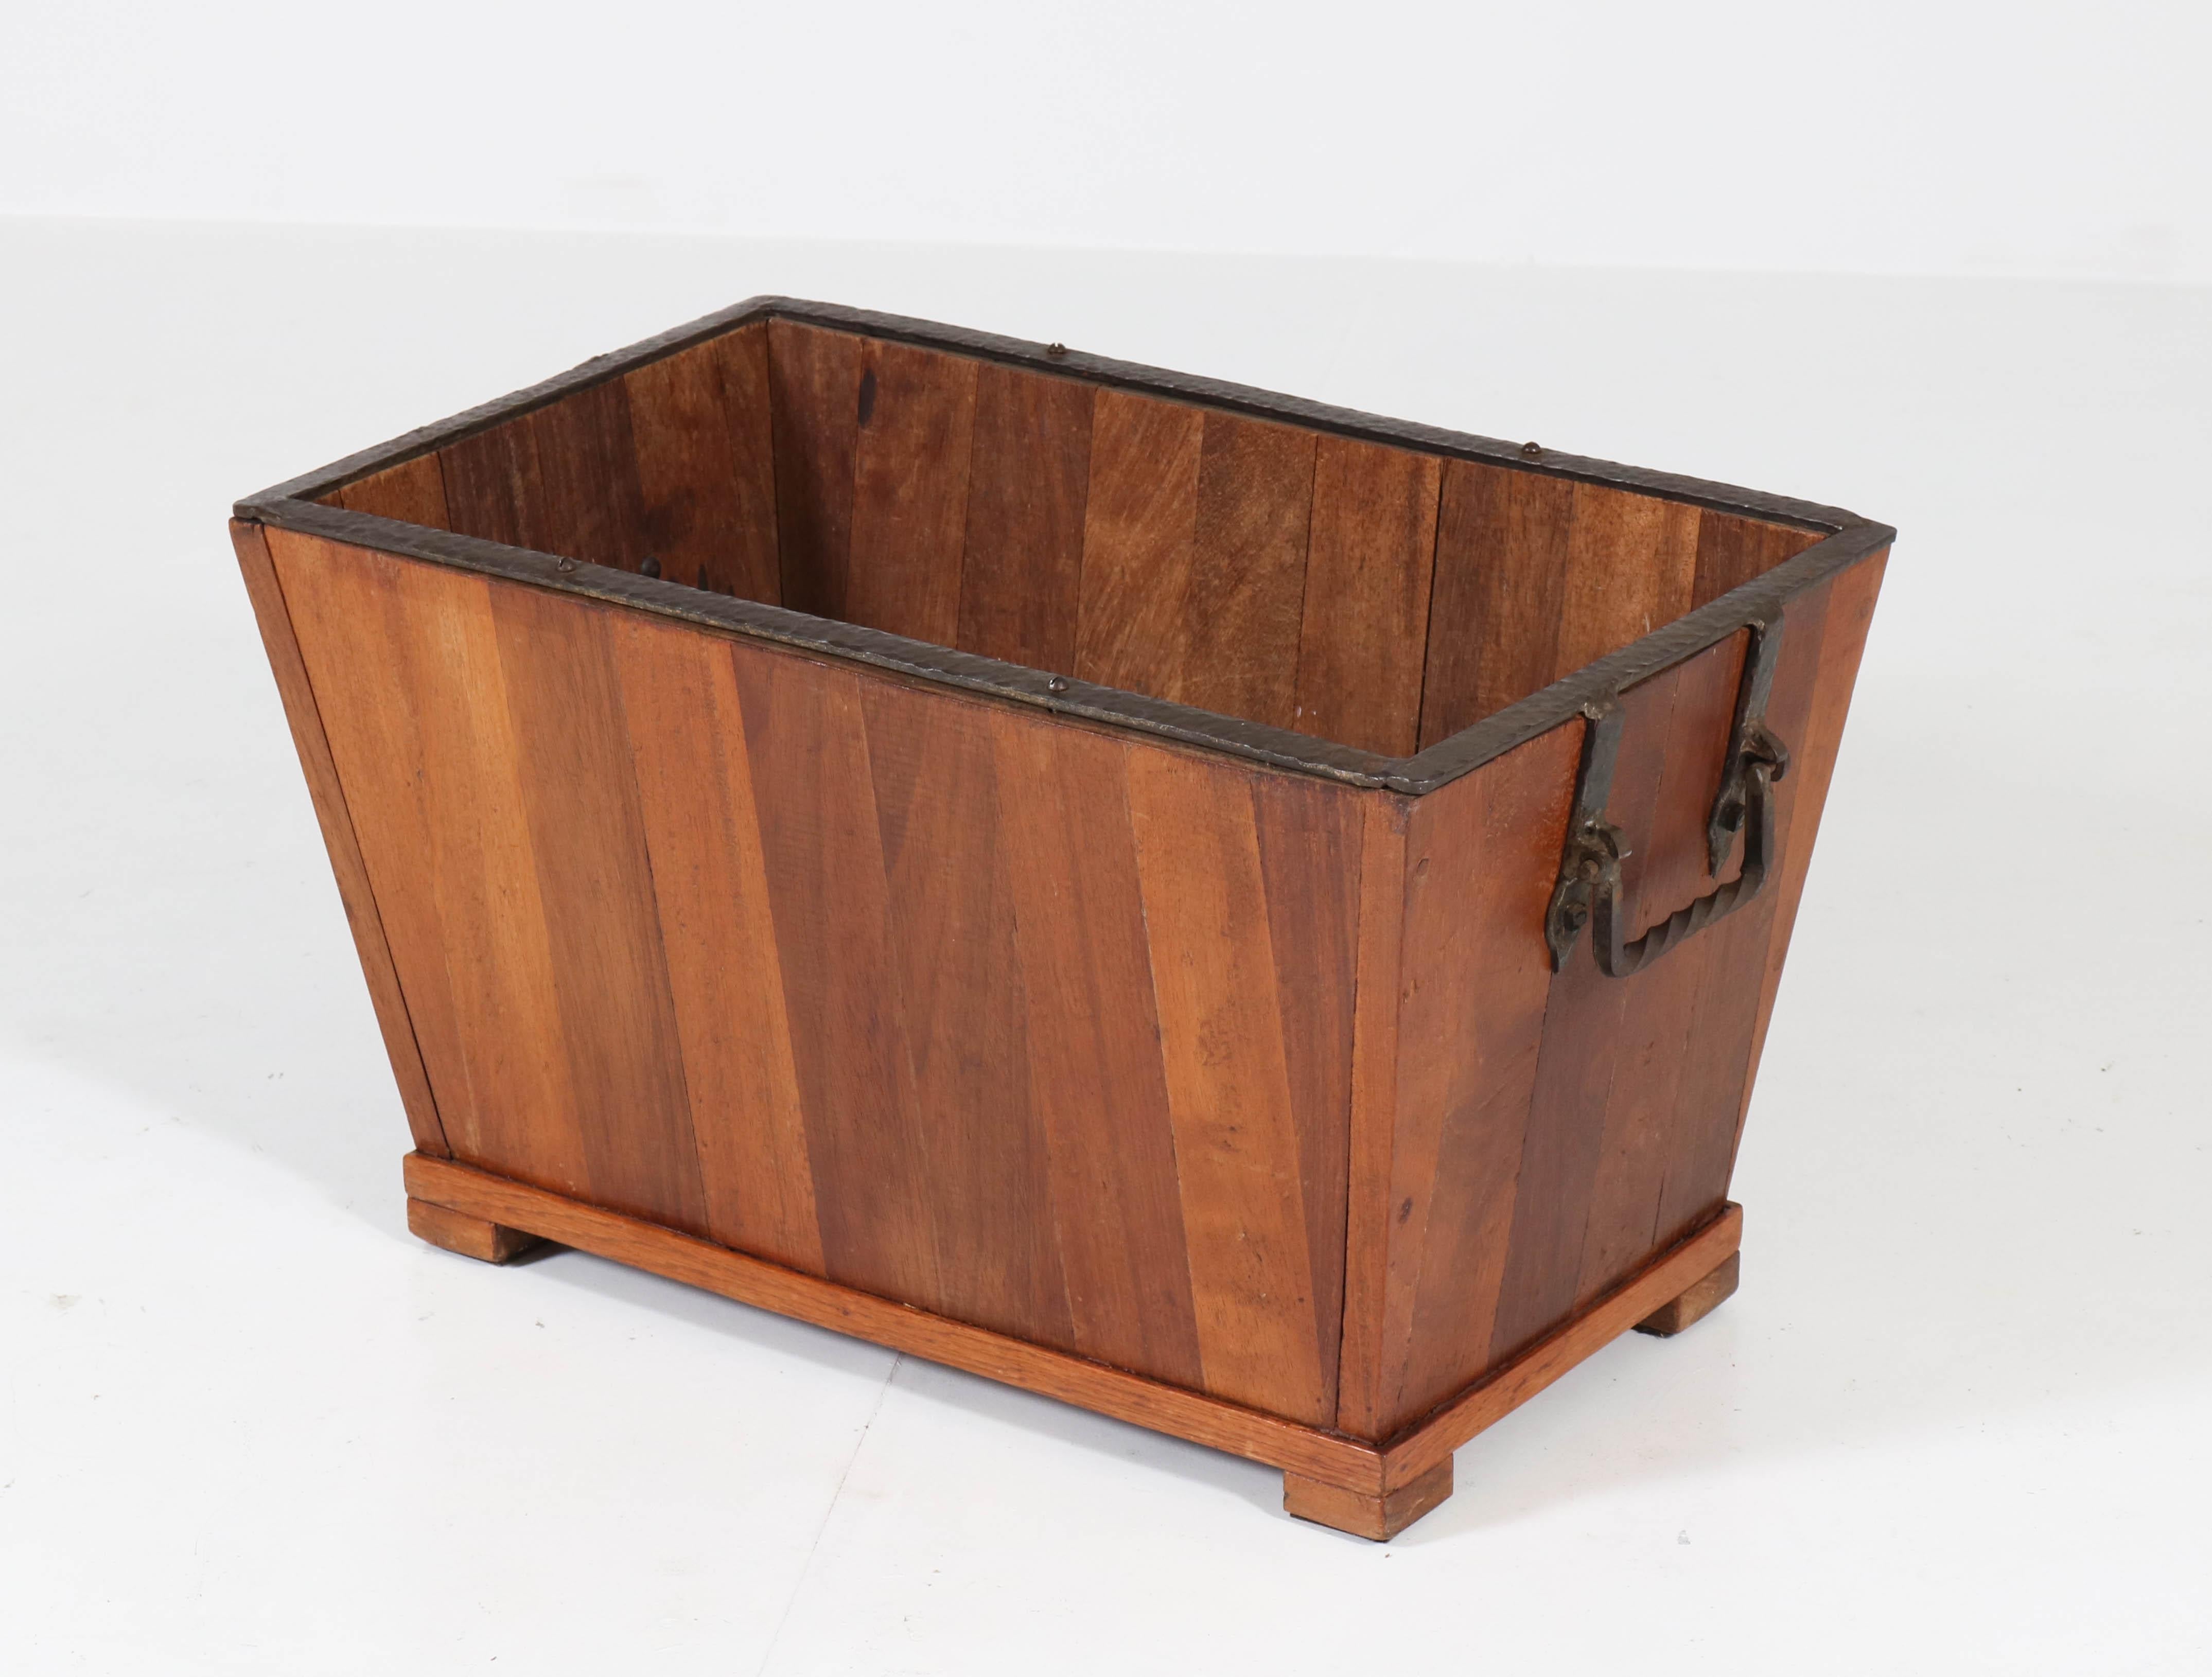 Stunning and rare Mid-Century Modern firewood box.
Solid padouk with original wrought iron lining and handles.
Striking Dutch design from the 1950s.
In good original condition with minor wear consistent with age and use,
preserving a beautiful